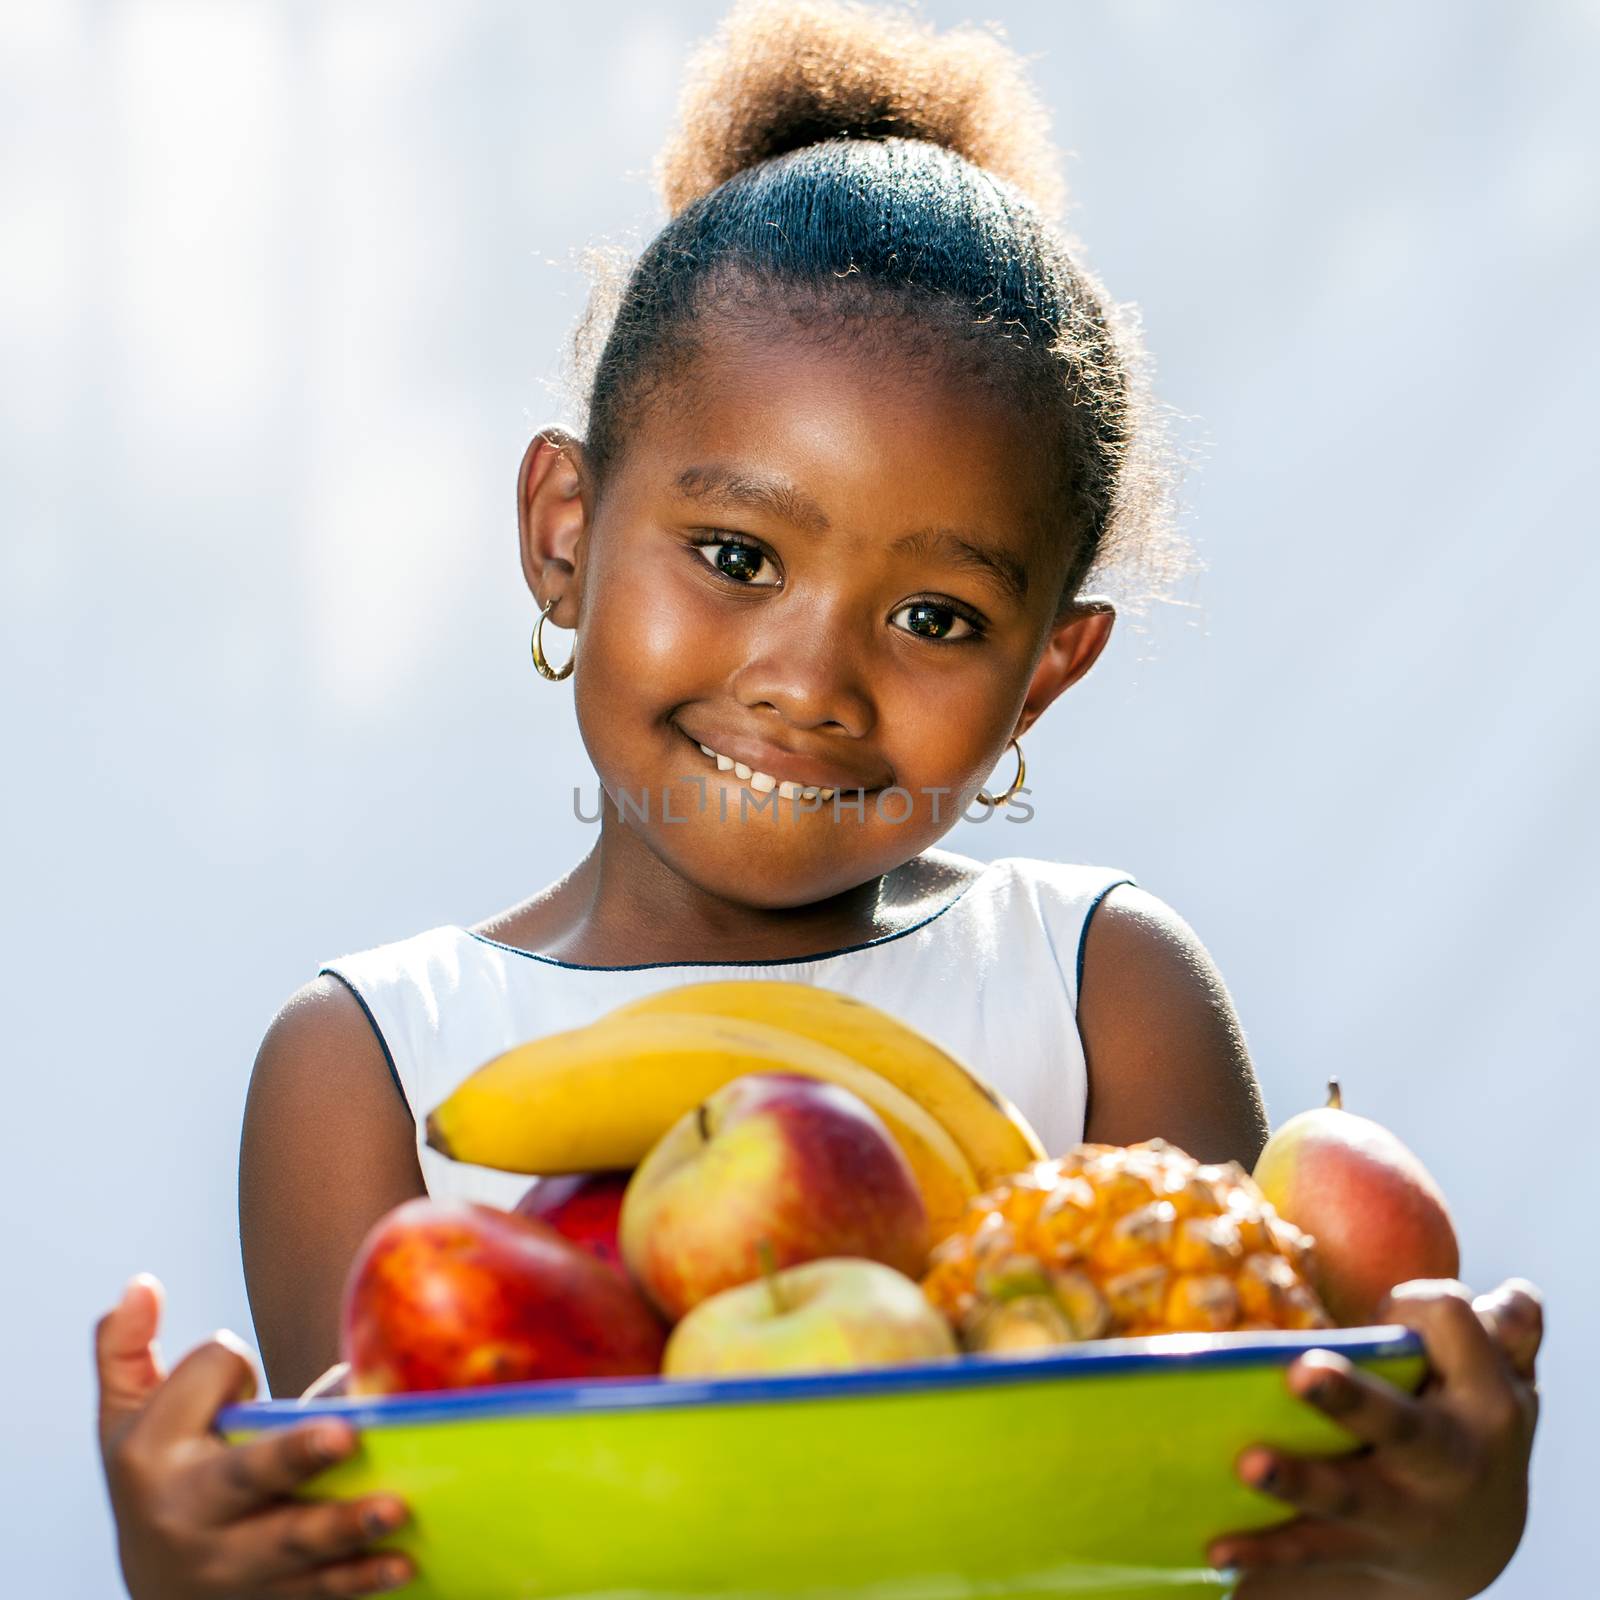 Close up portrait of cute African girl holding fruit bowl.Isolated against light background.